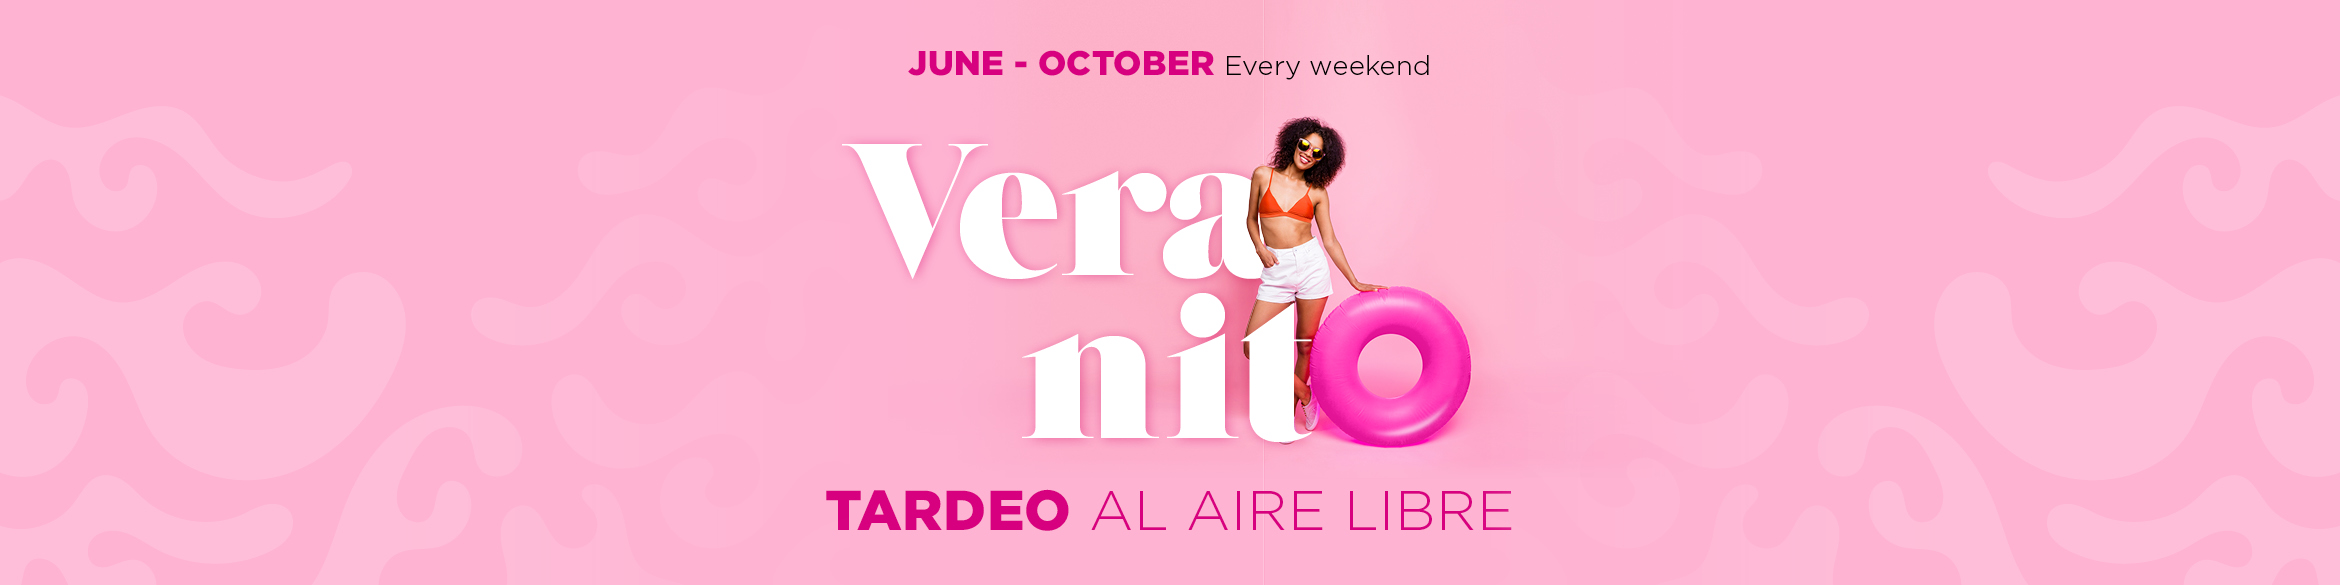 VERANITO AT LA TORRE OUTLET ZARAGOZA I JUNE AND JULY ACTIVITIES